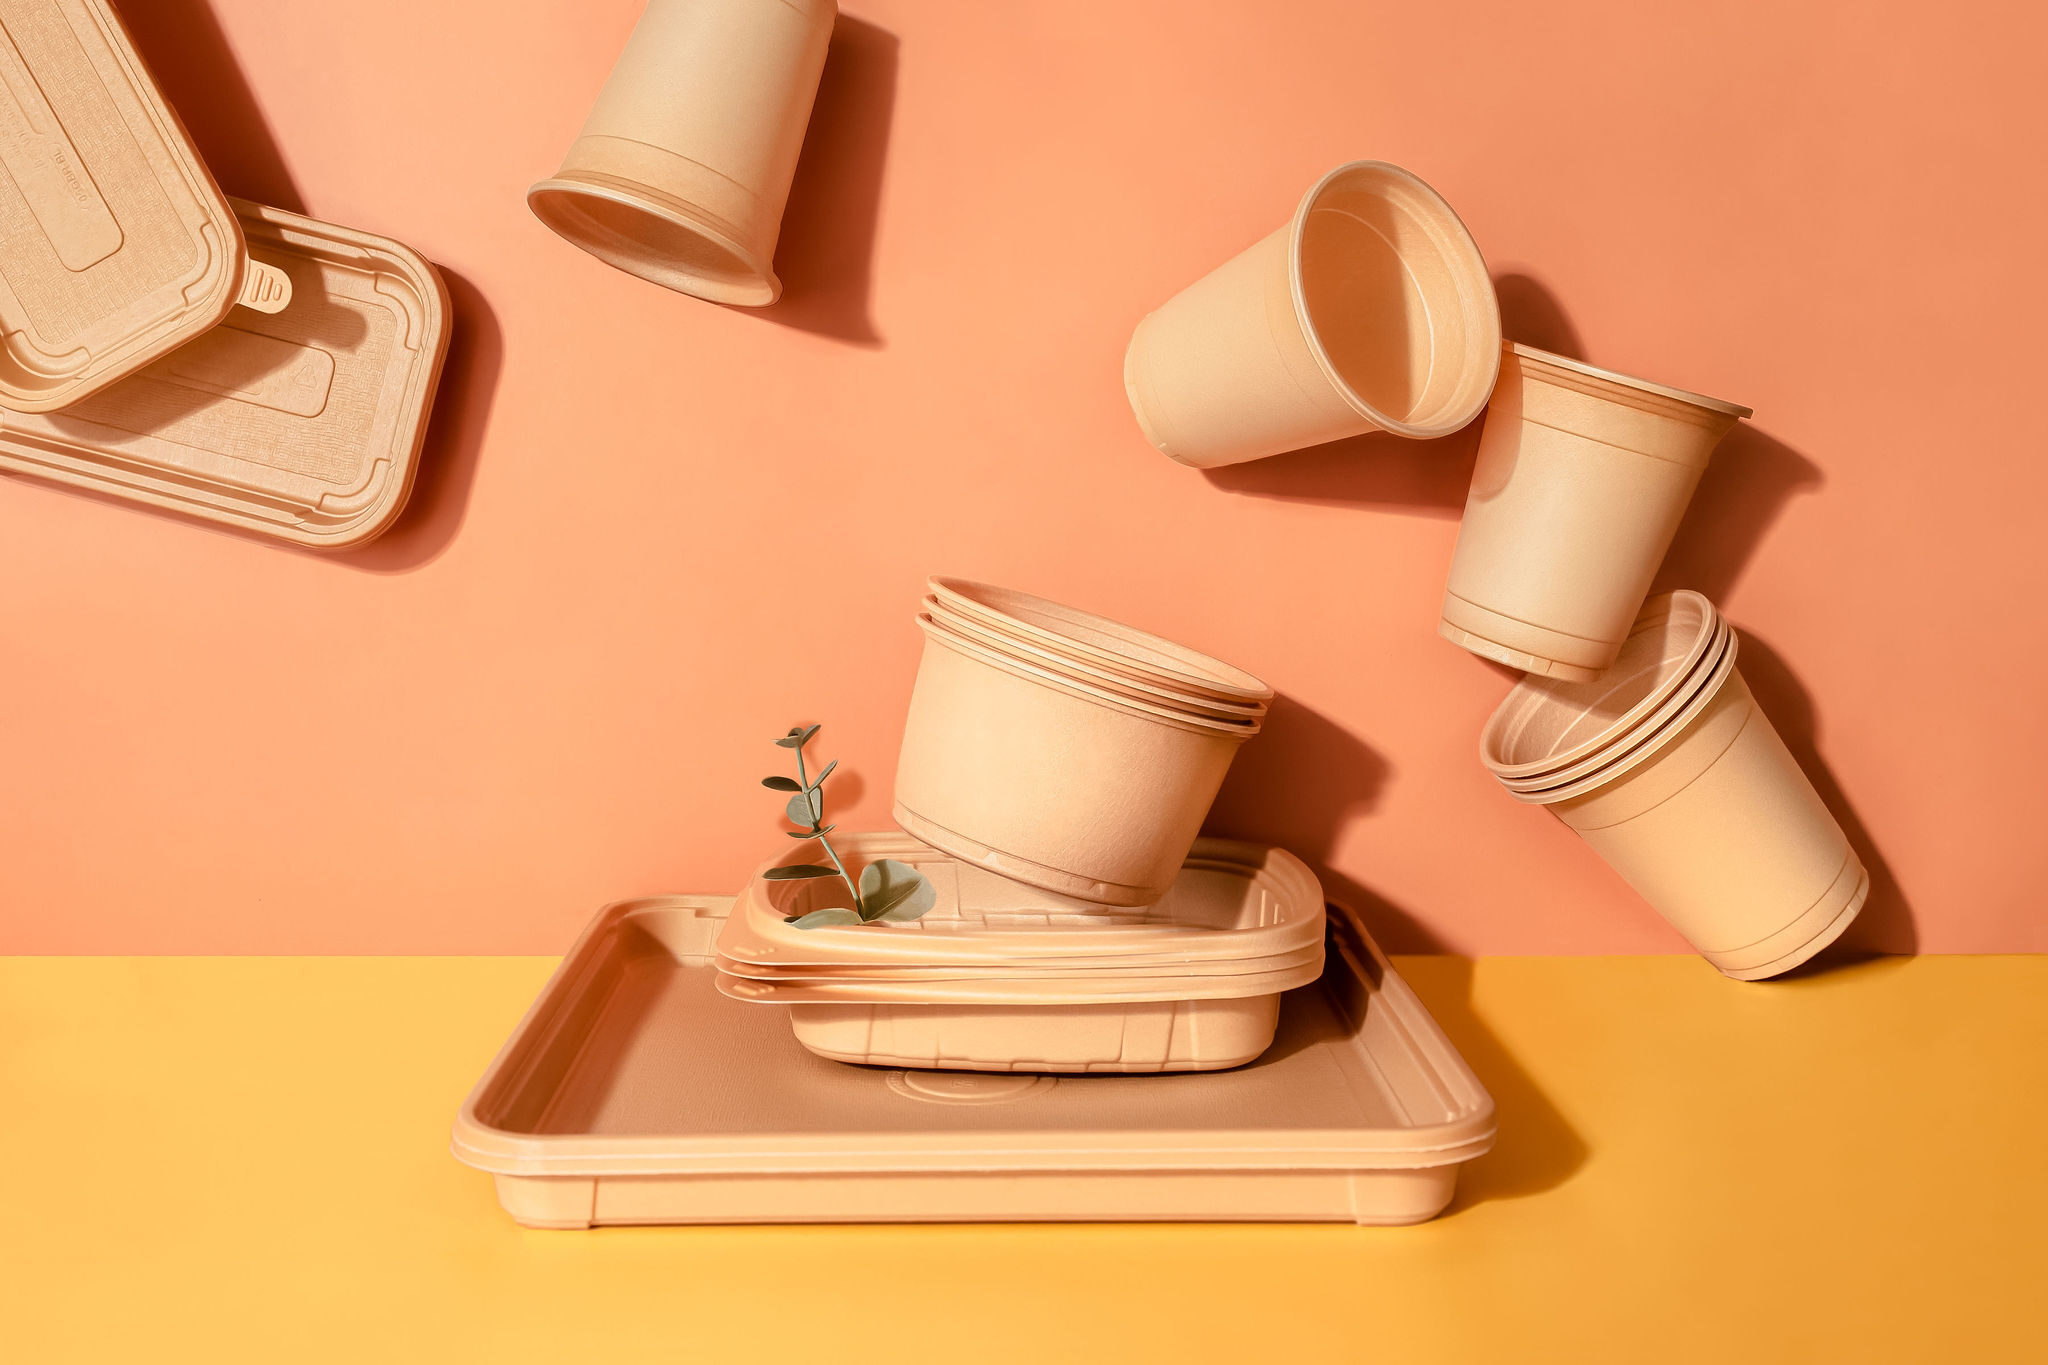 Thermoformed cups and trays made of wood-based Sulapac material